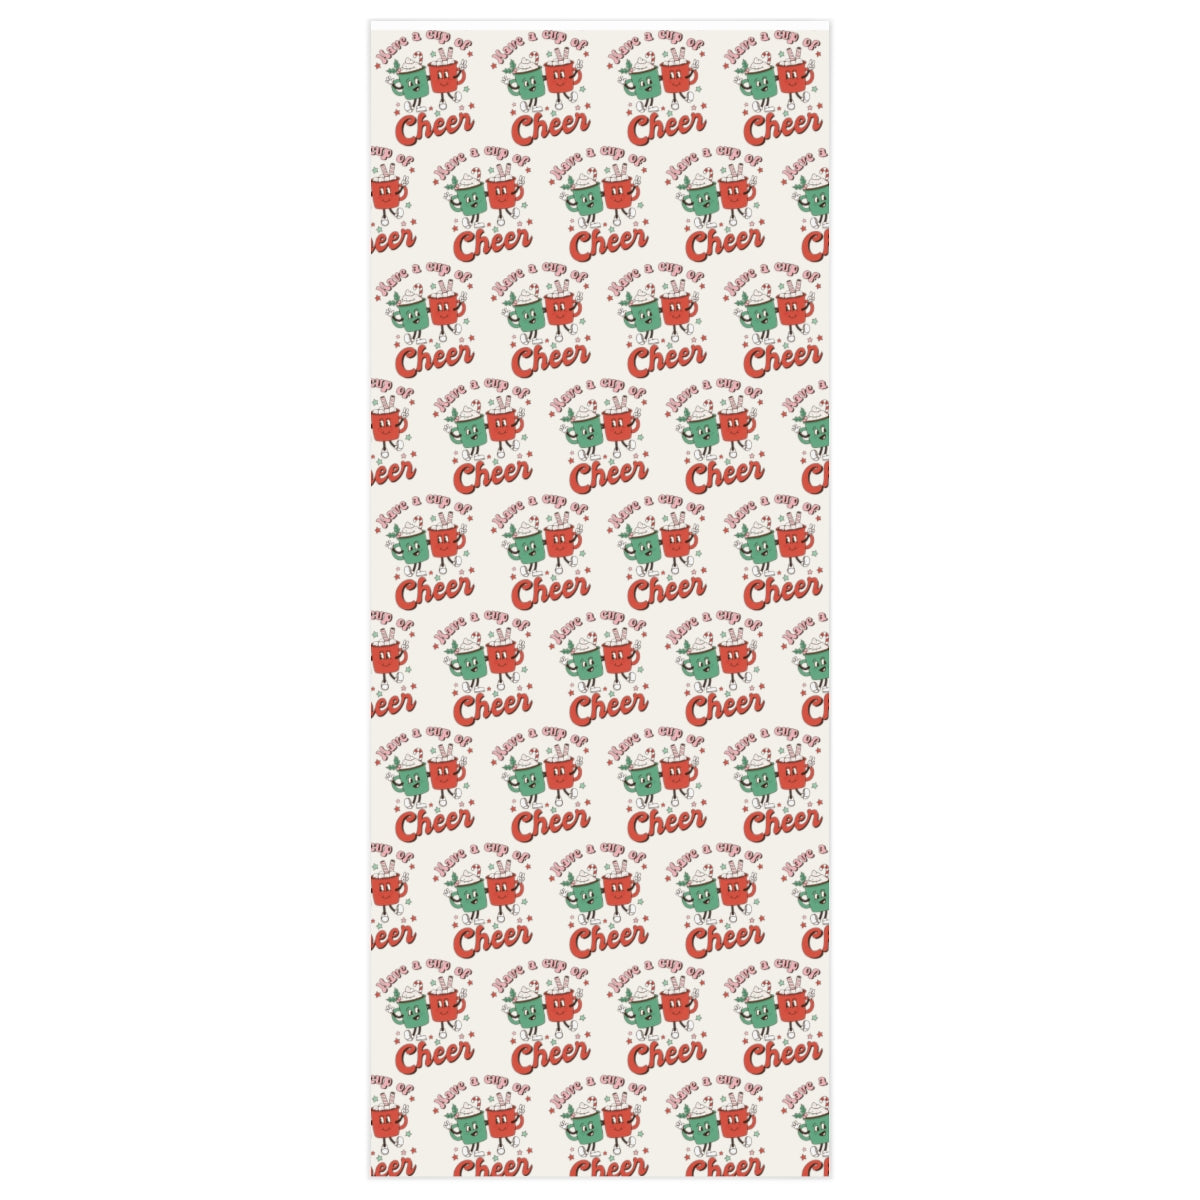 Retro Christmas Wrapping Paper - Cup of Cheer